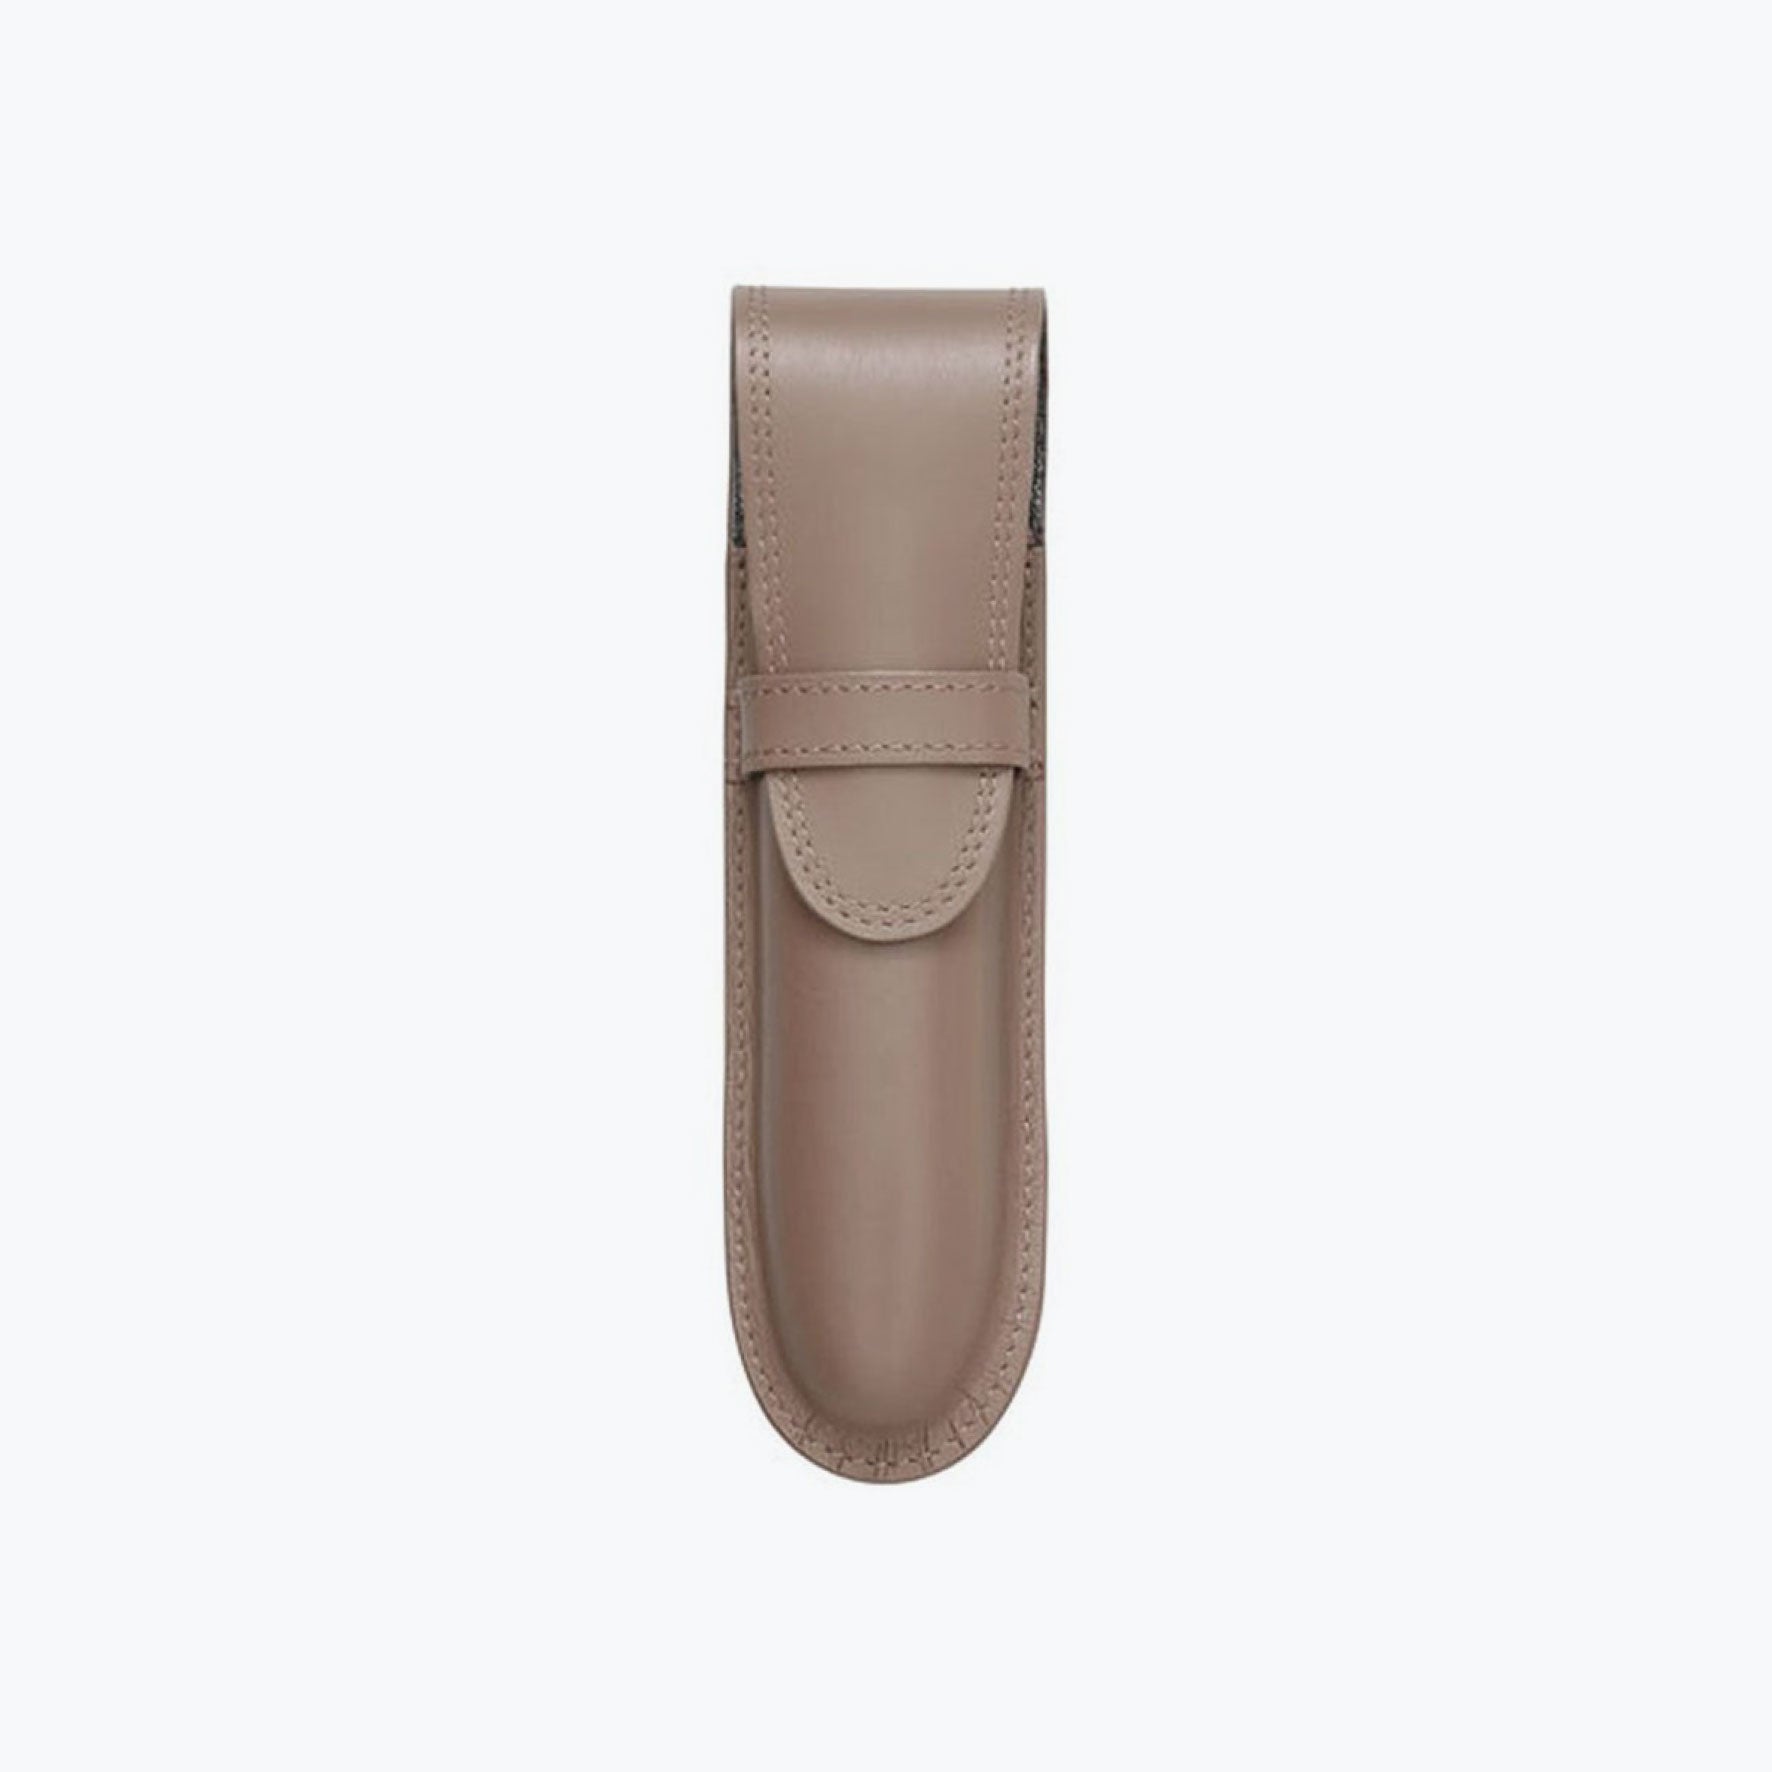 Pilot - Pen Pouch - Trender Leather - For Two - Mocha <Outgoing>